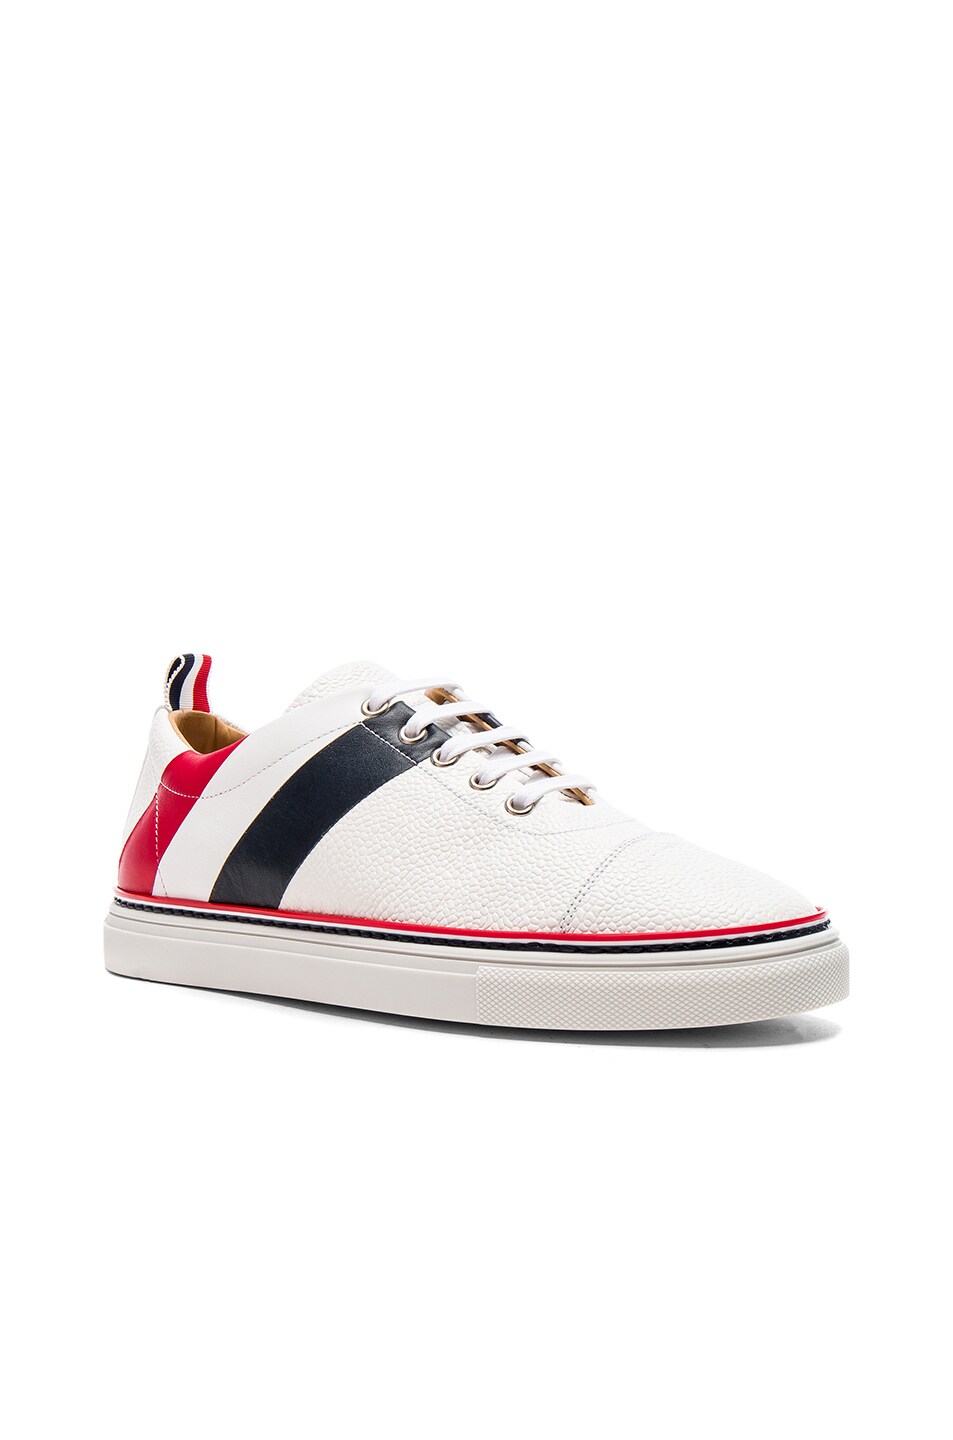 Image 1 of Thom Browne Pebble Grain & Calf Leather Straight Toe Cap Sneakers in White